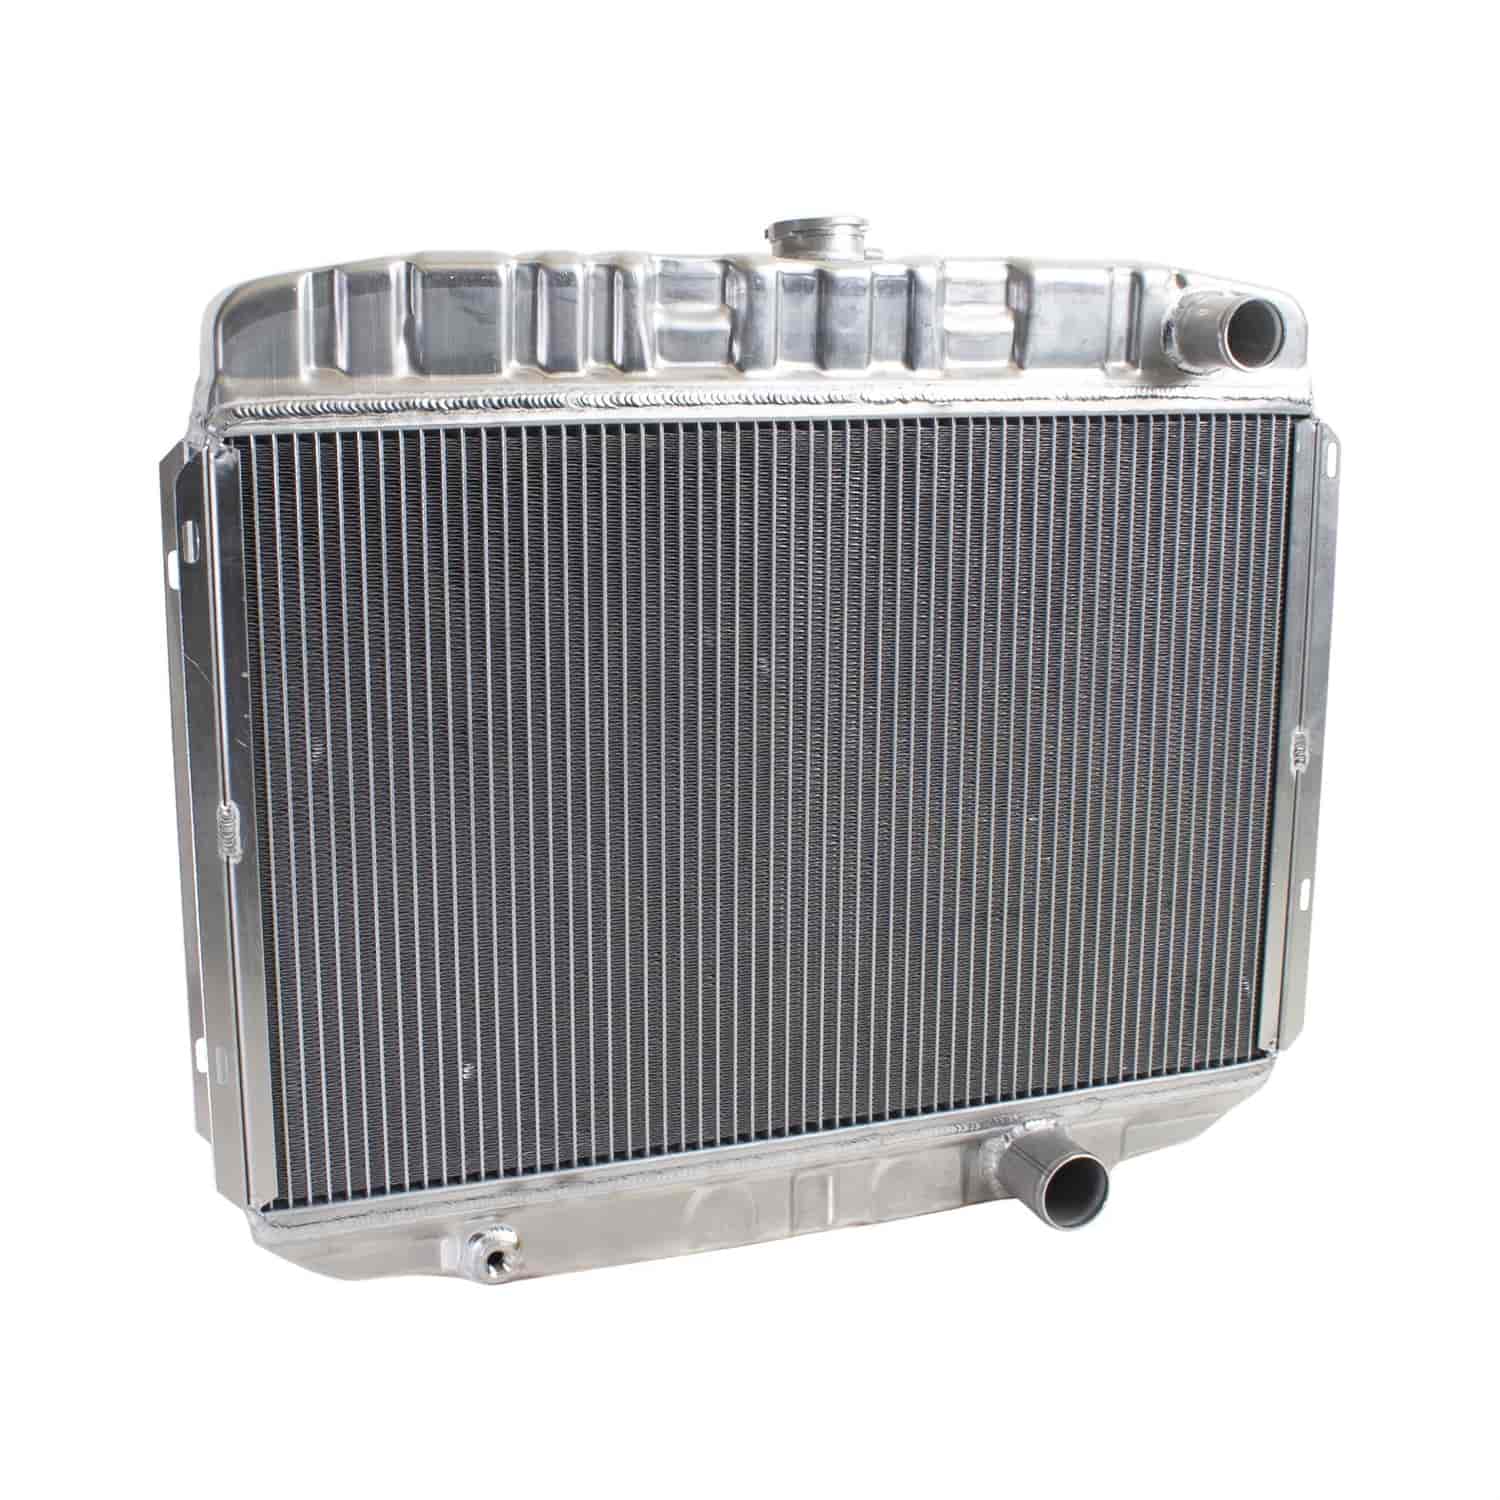 ExactFit Radiator for 1968-1970 Ford Mustang/Mercury Cougar with Small Block